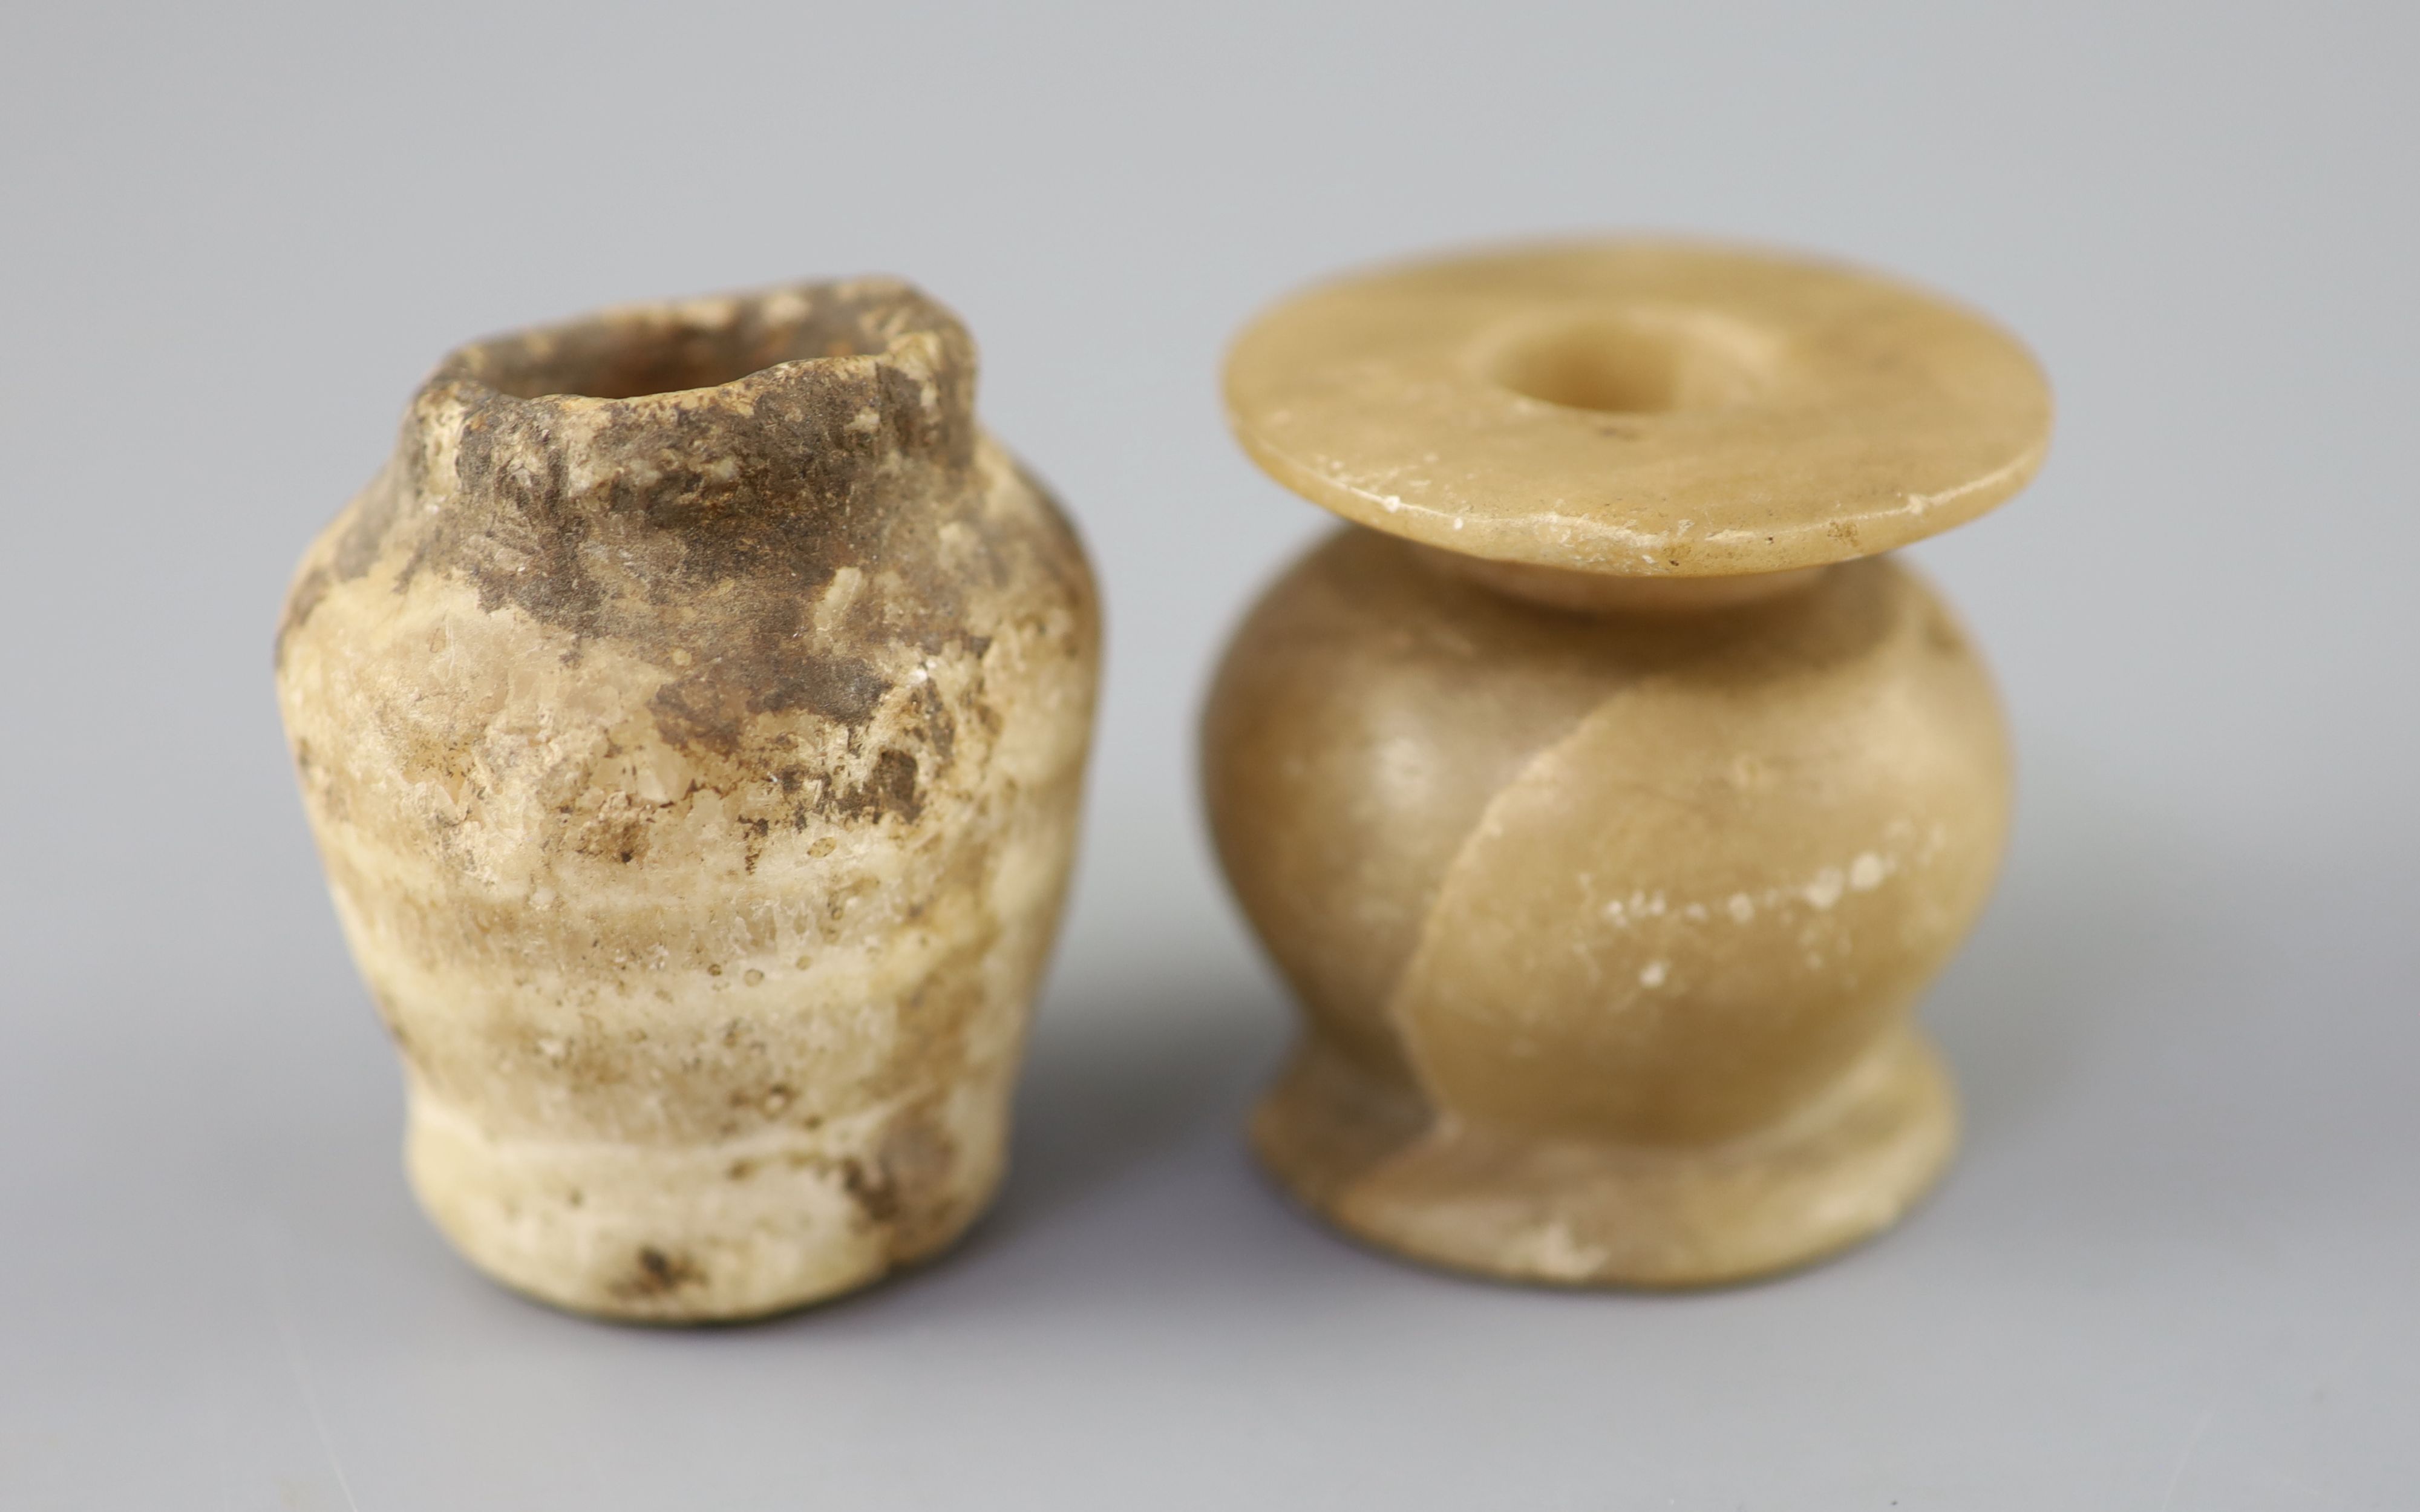 Two Egyptian alabaster cosmetic jars, c.1500 BC and Ptolemaic period (305-30 BC), Provenance - A. T. Arber-Cooke